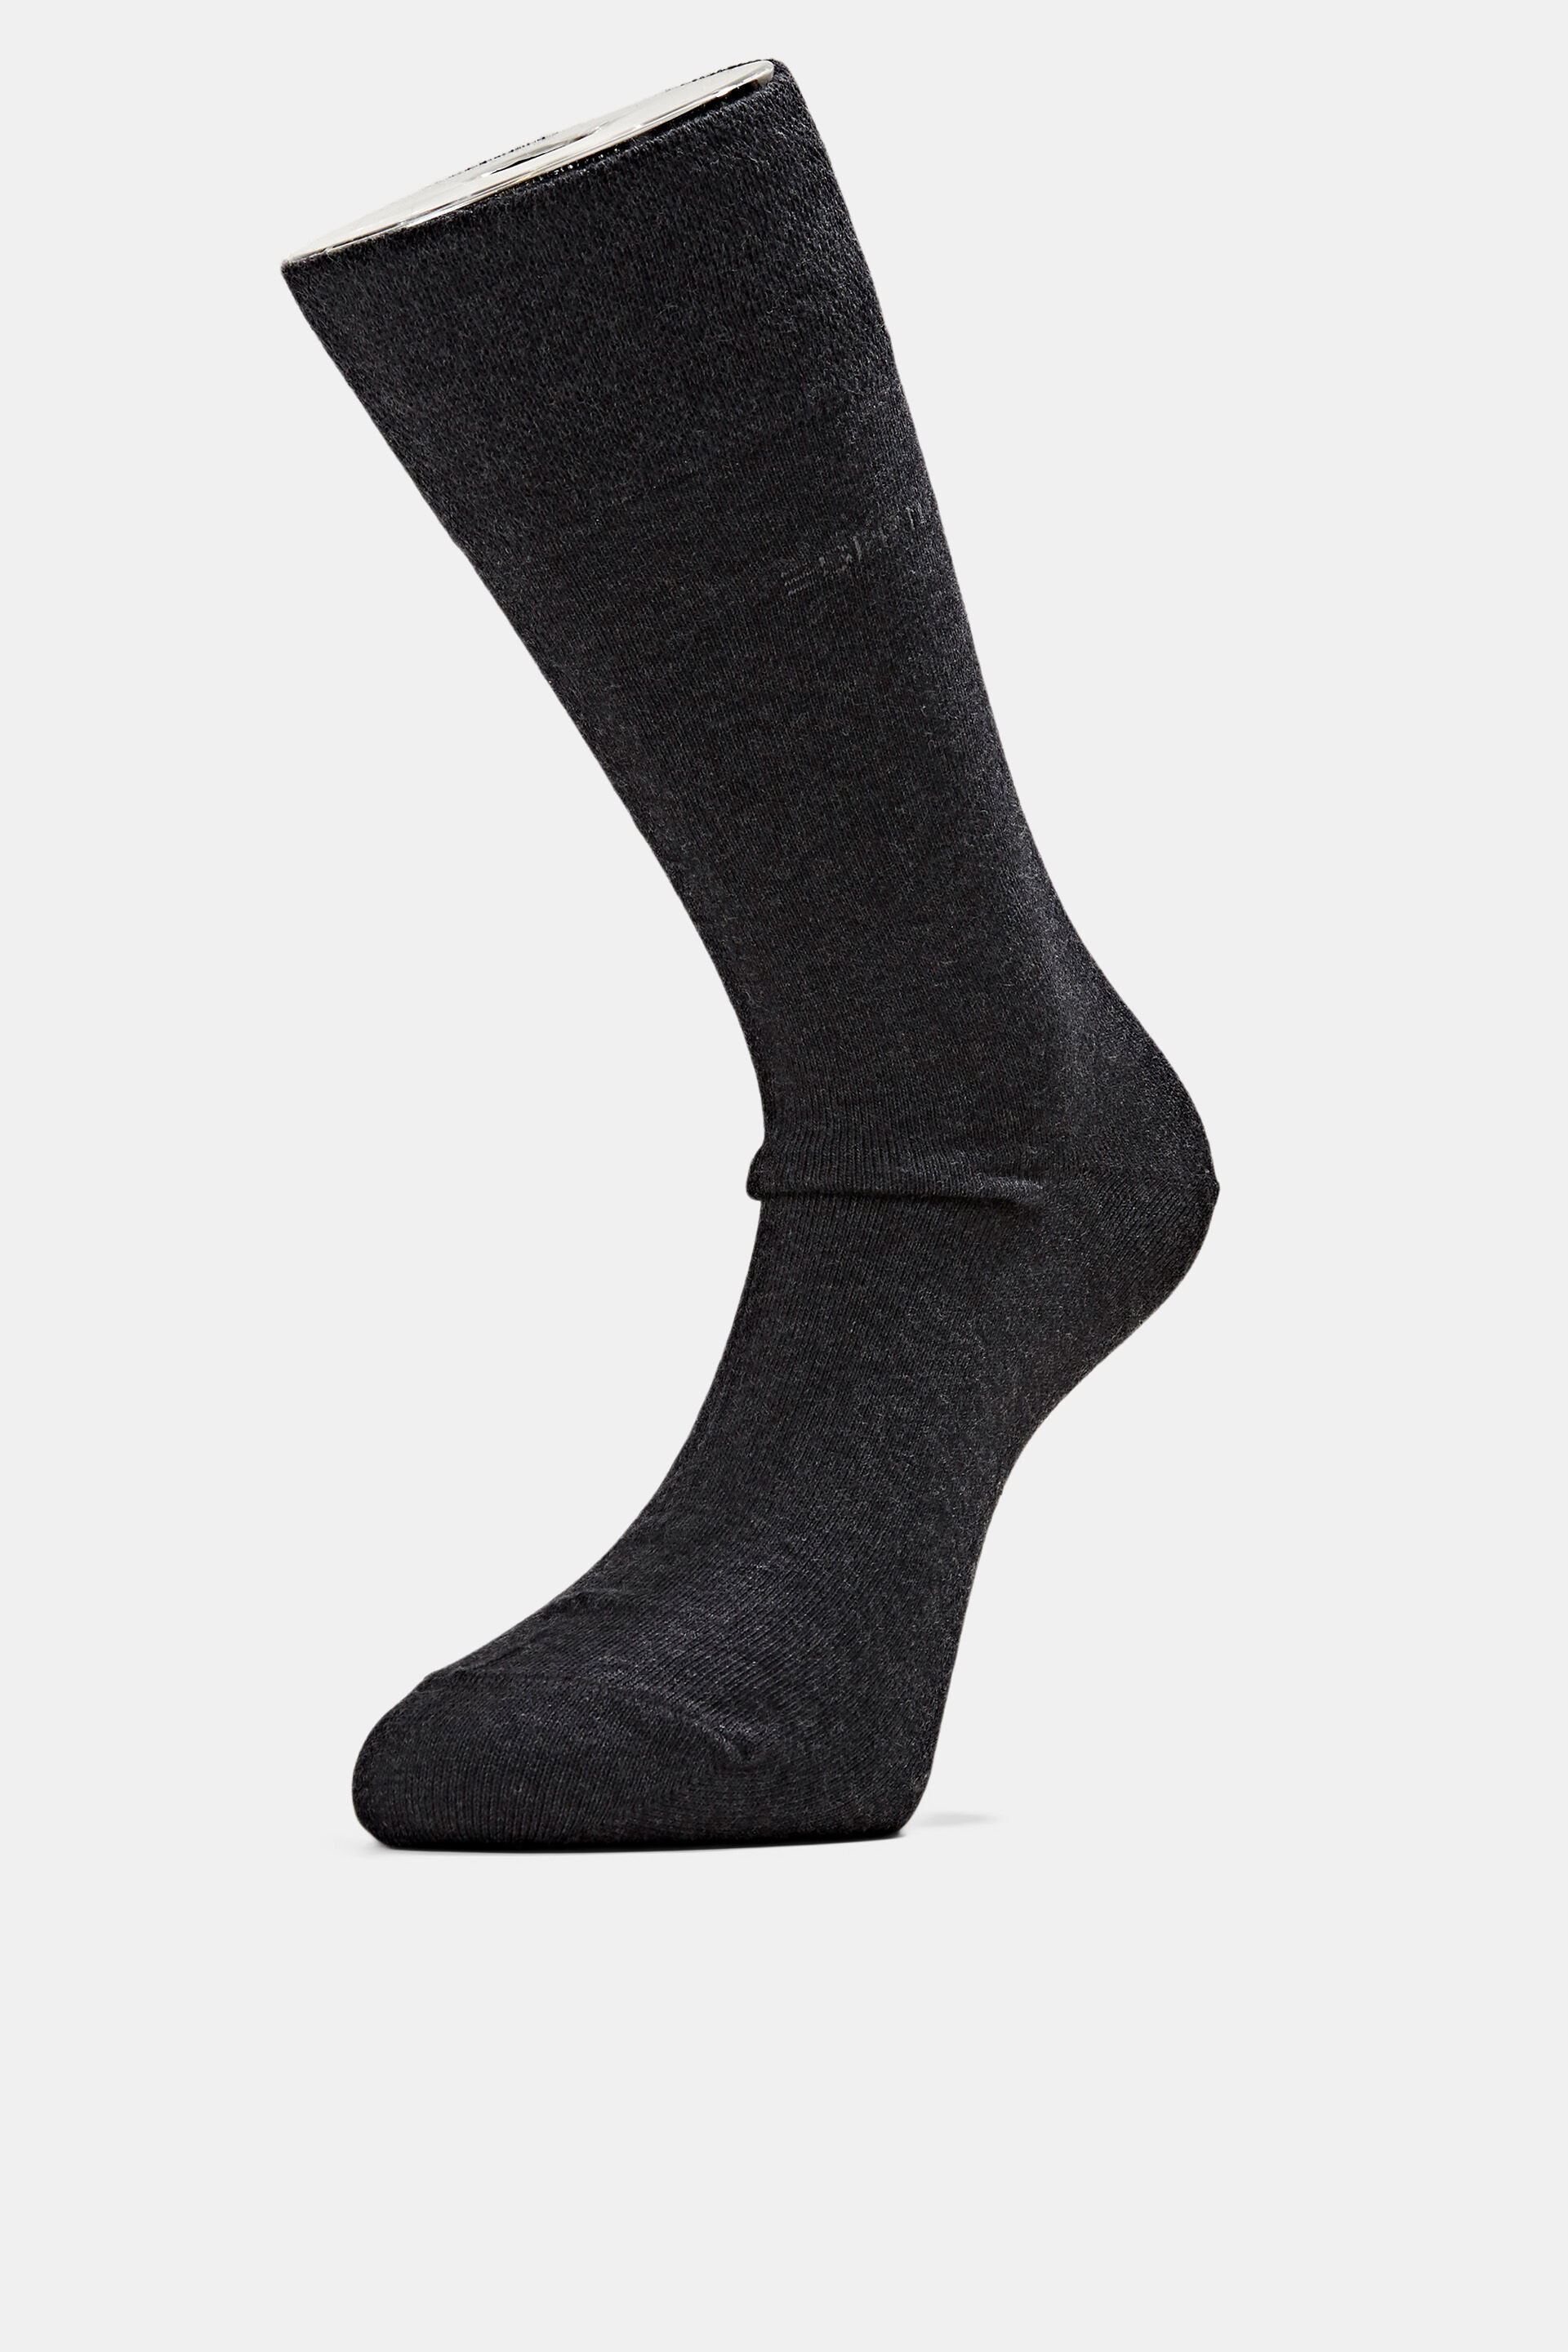 Esprit of with cotton blended soft organic cuffs, Double pack socks